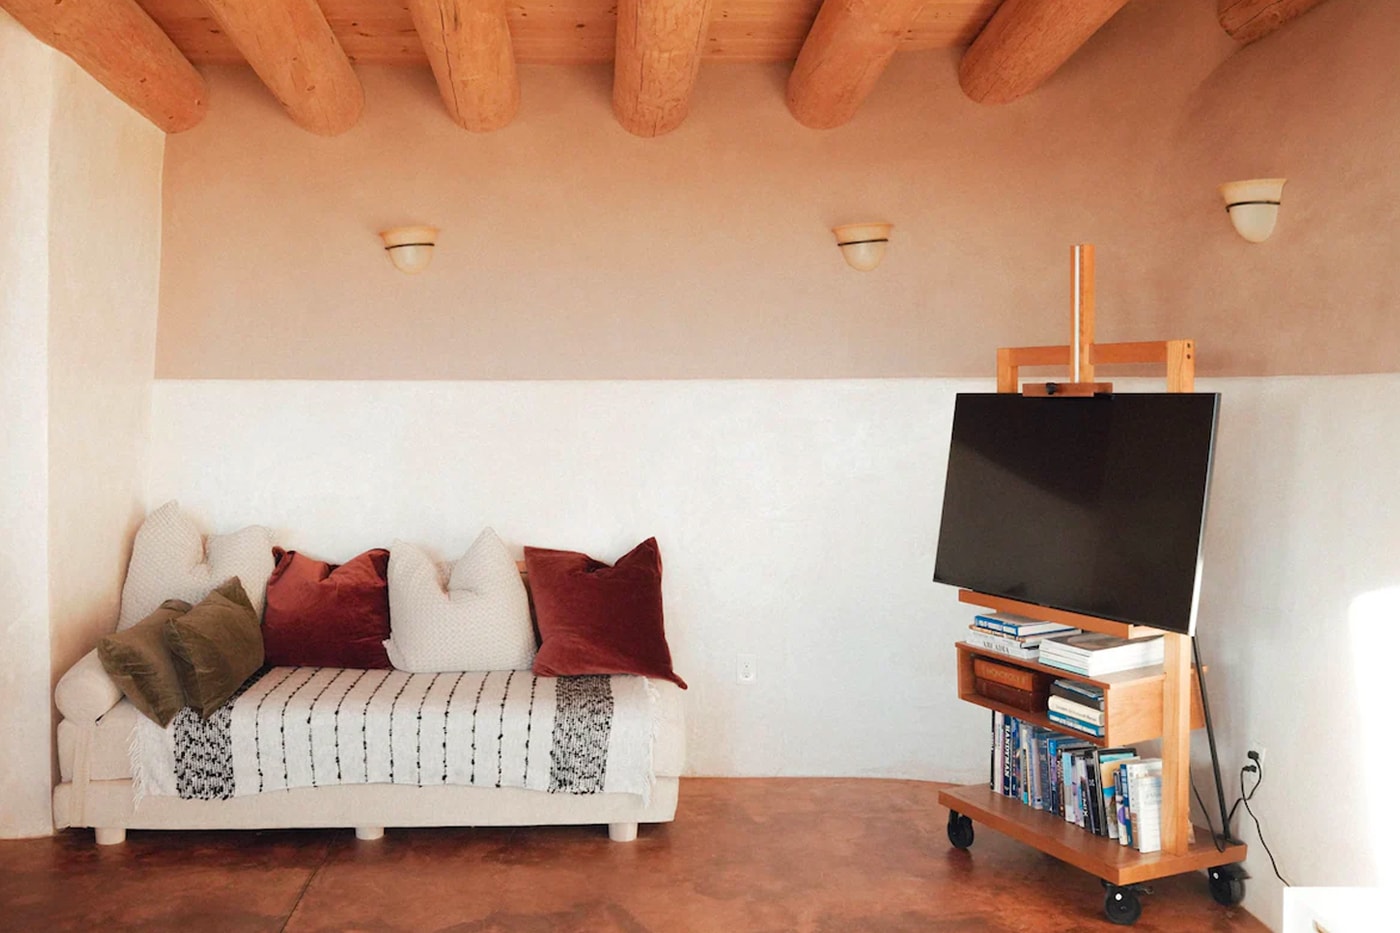 Airbnb Home Rental Taos New Mexico Off-Grid Bungalow Raw Modern Interior Design